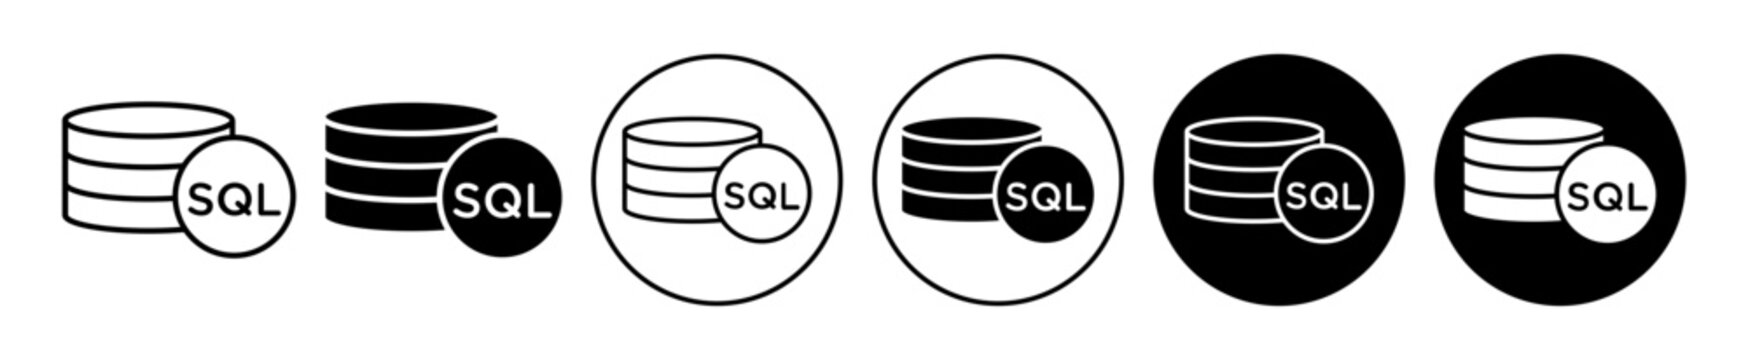 sql icon set. Structured Query Language database server vector symbol in black filled and outlined style. mysql query sign.